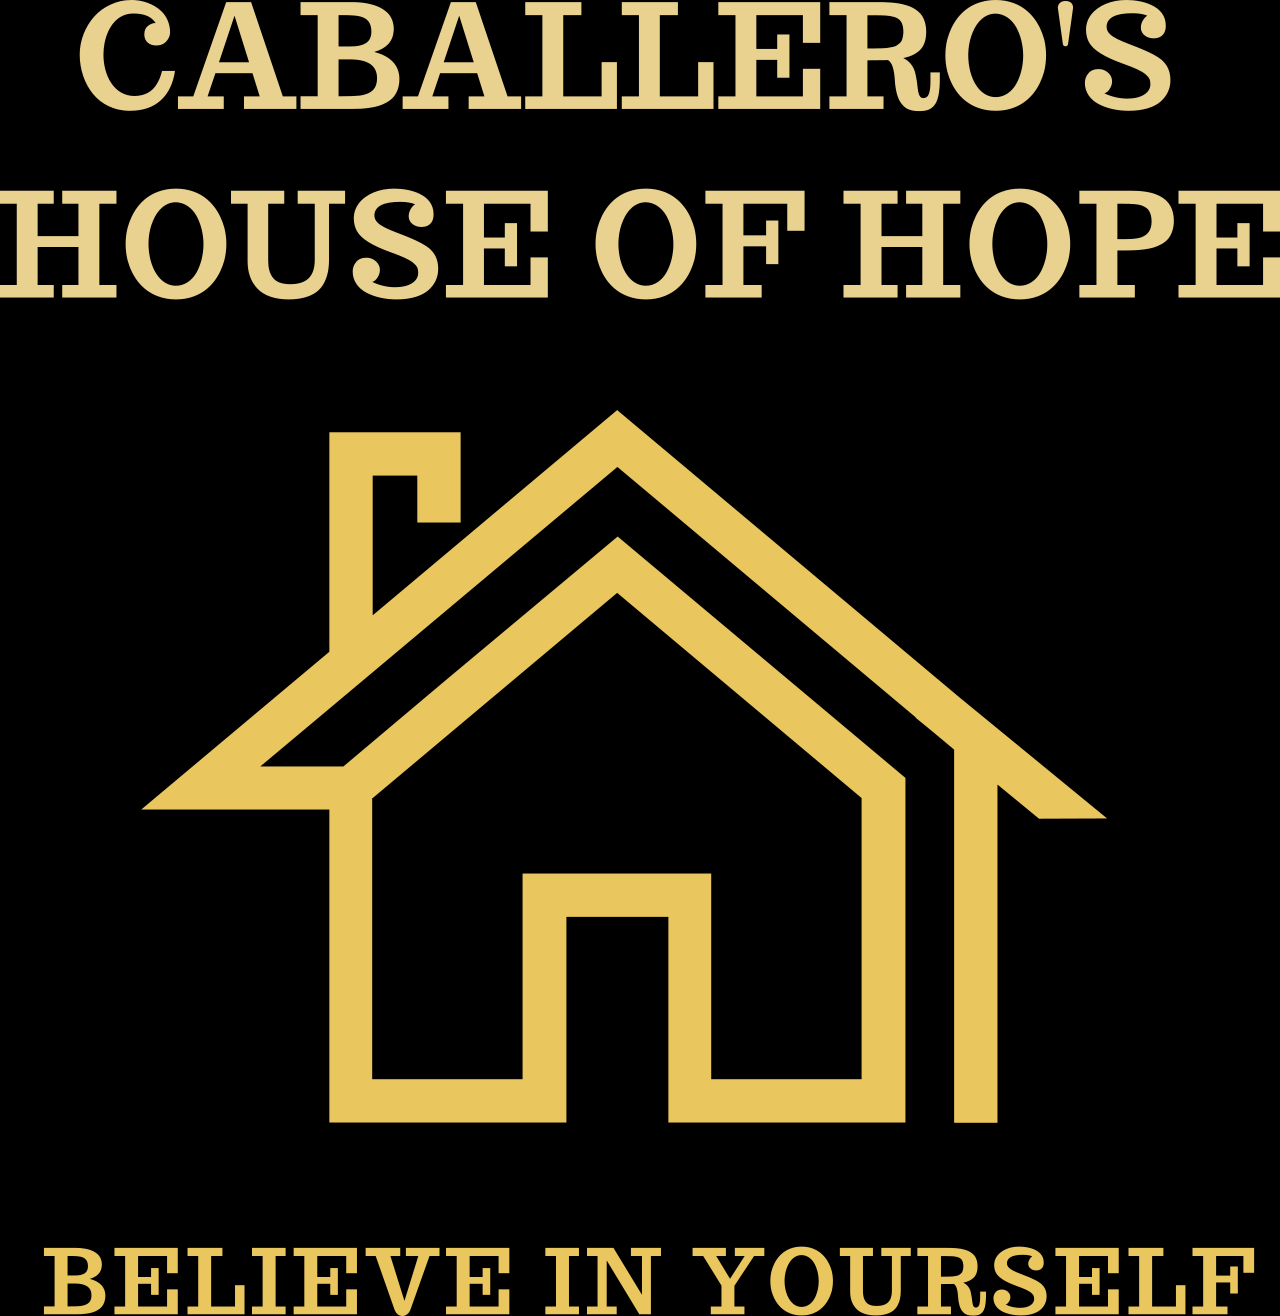 CABALLEROS HOUSE OF HOPE 's web page